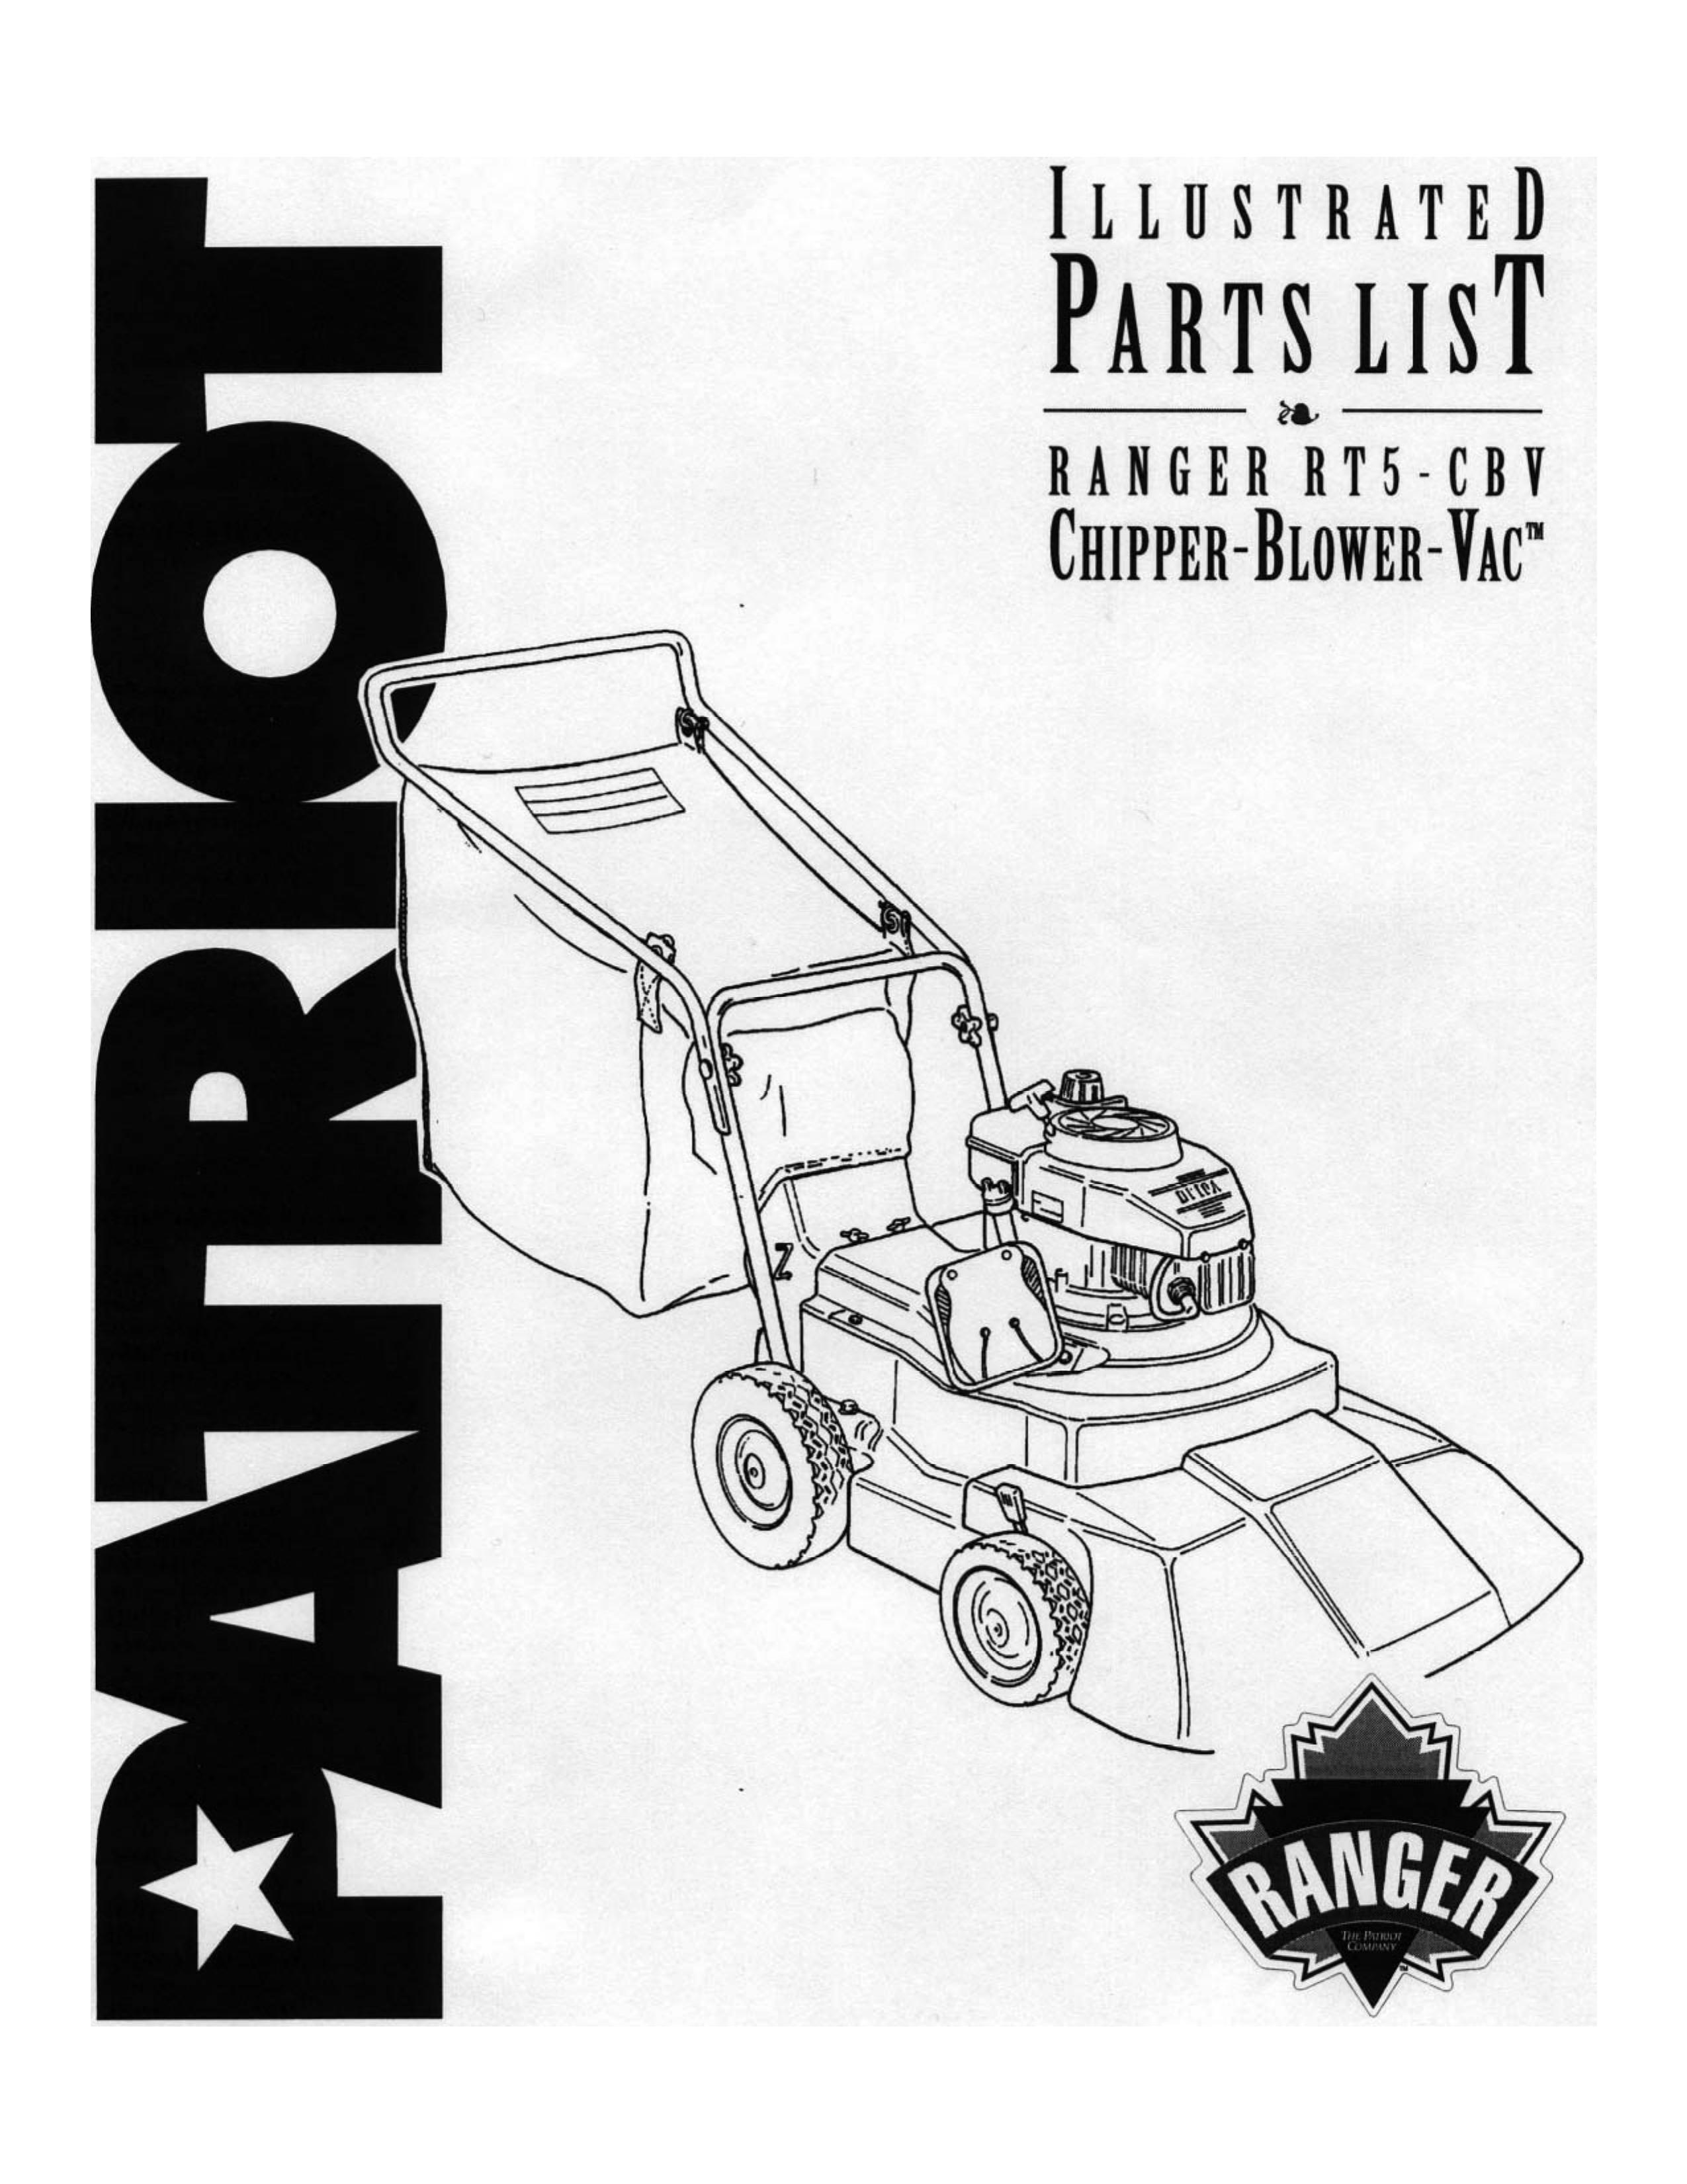 Patriot Products RT5-CBV Blower User Manual